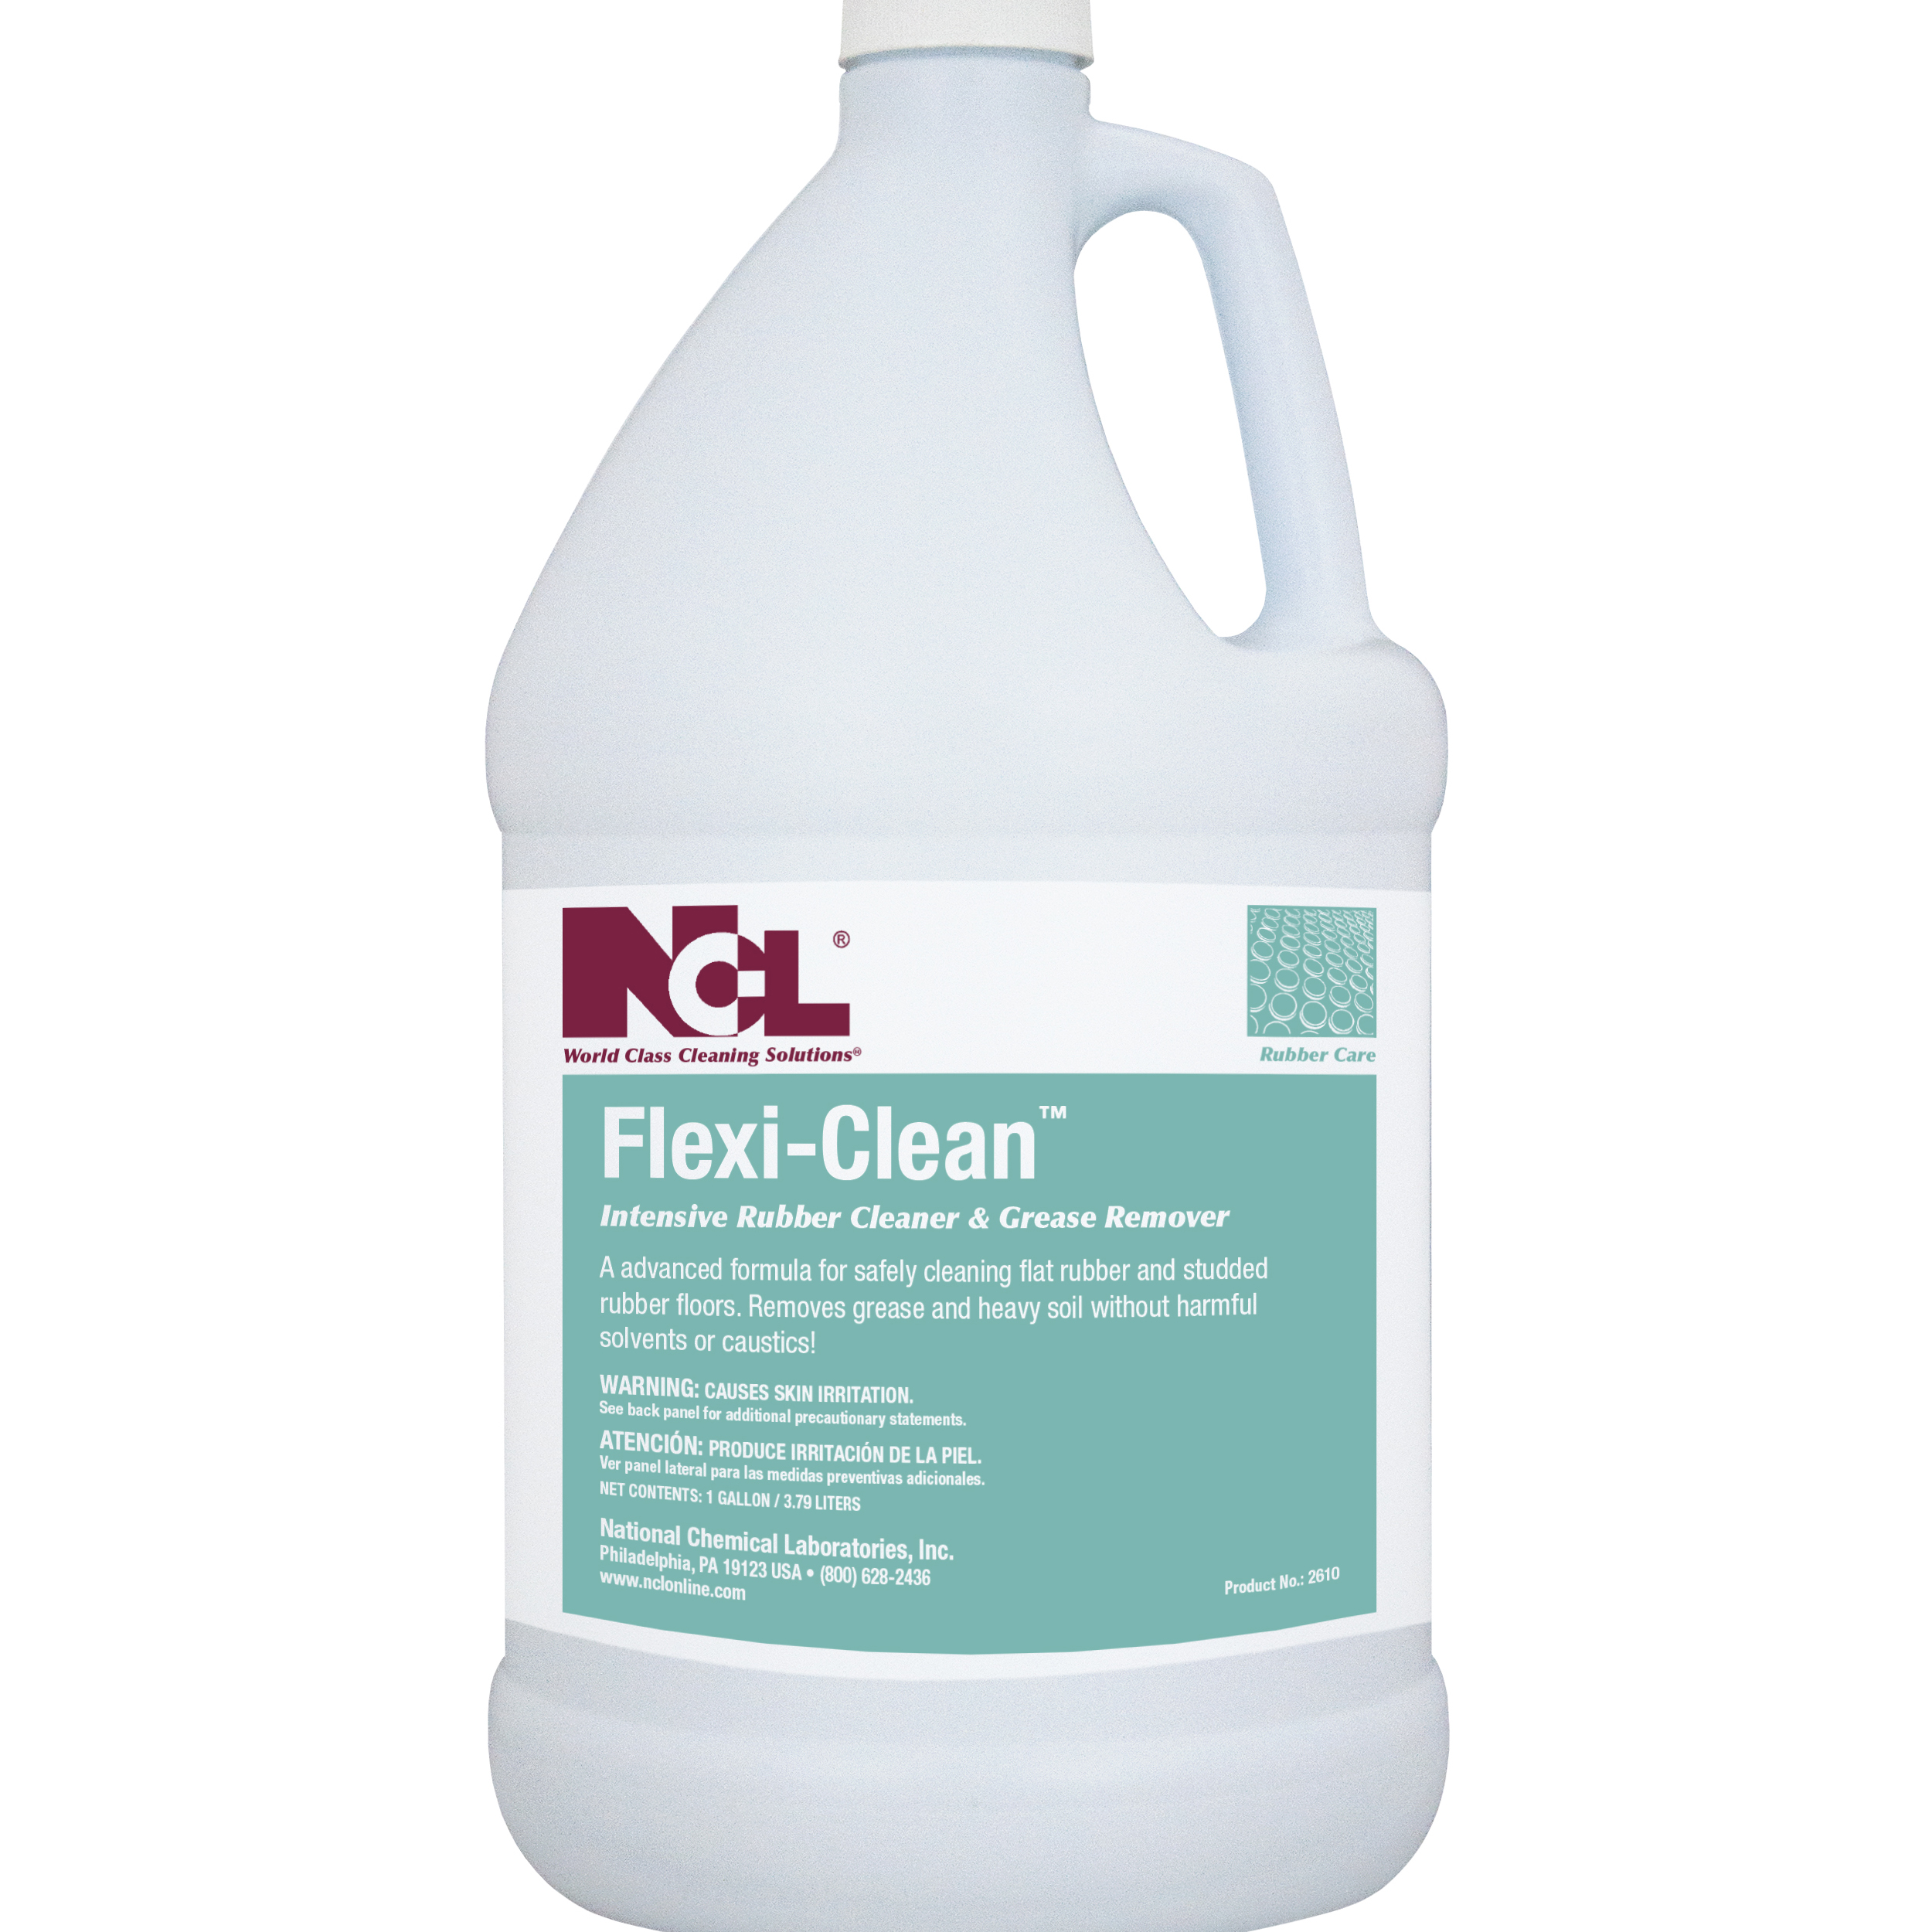  FLEXI-CLEAN Intensive Rubber Cleaner and Grease Remover 4/1 Gal. Case (NCL2610-29) 